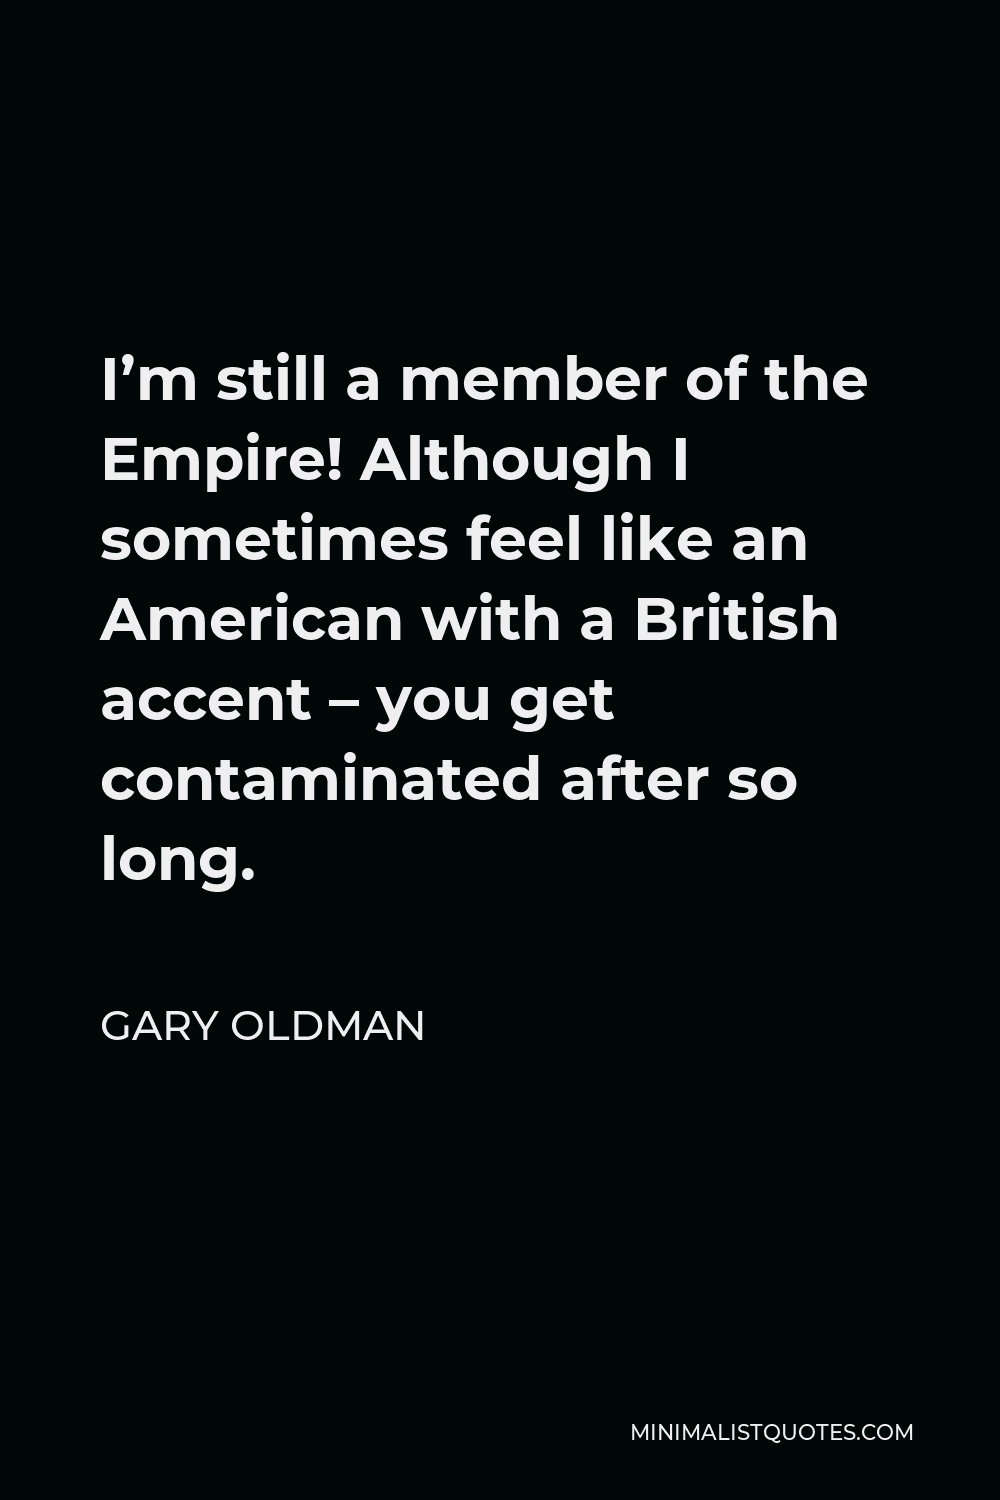 Gary Oldman Quote - I’m still a member of the Empire! Although I sometimes feel like an American with a British accent – you get contaminated after so long.